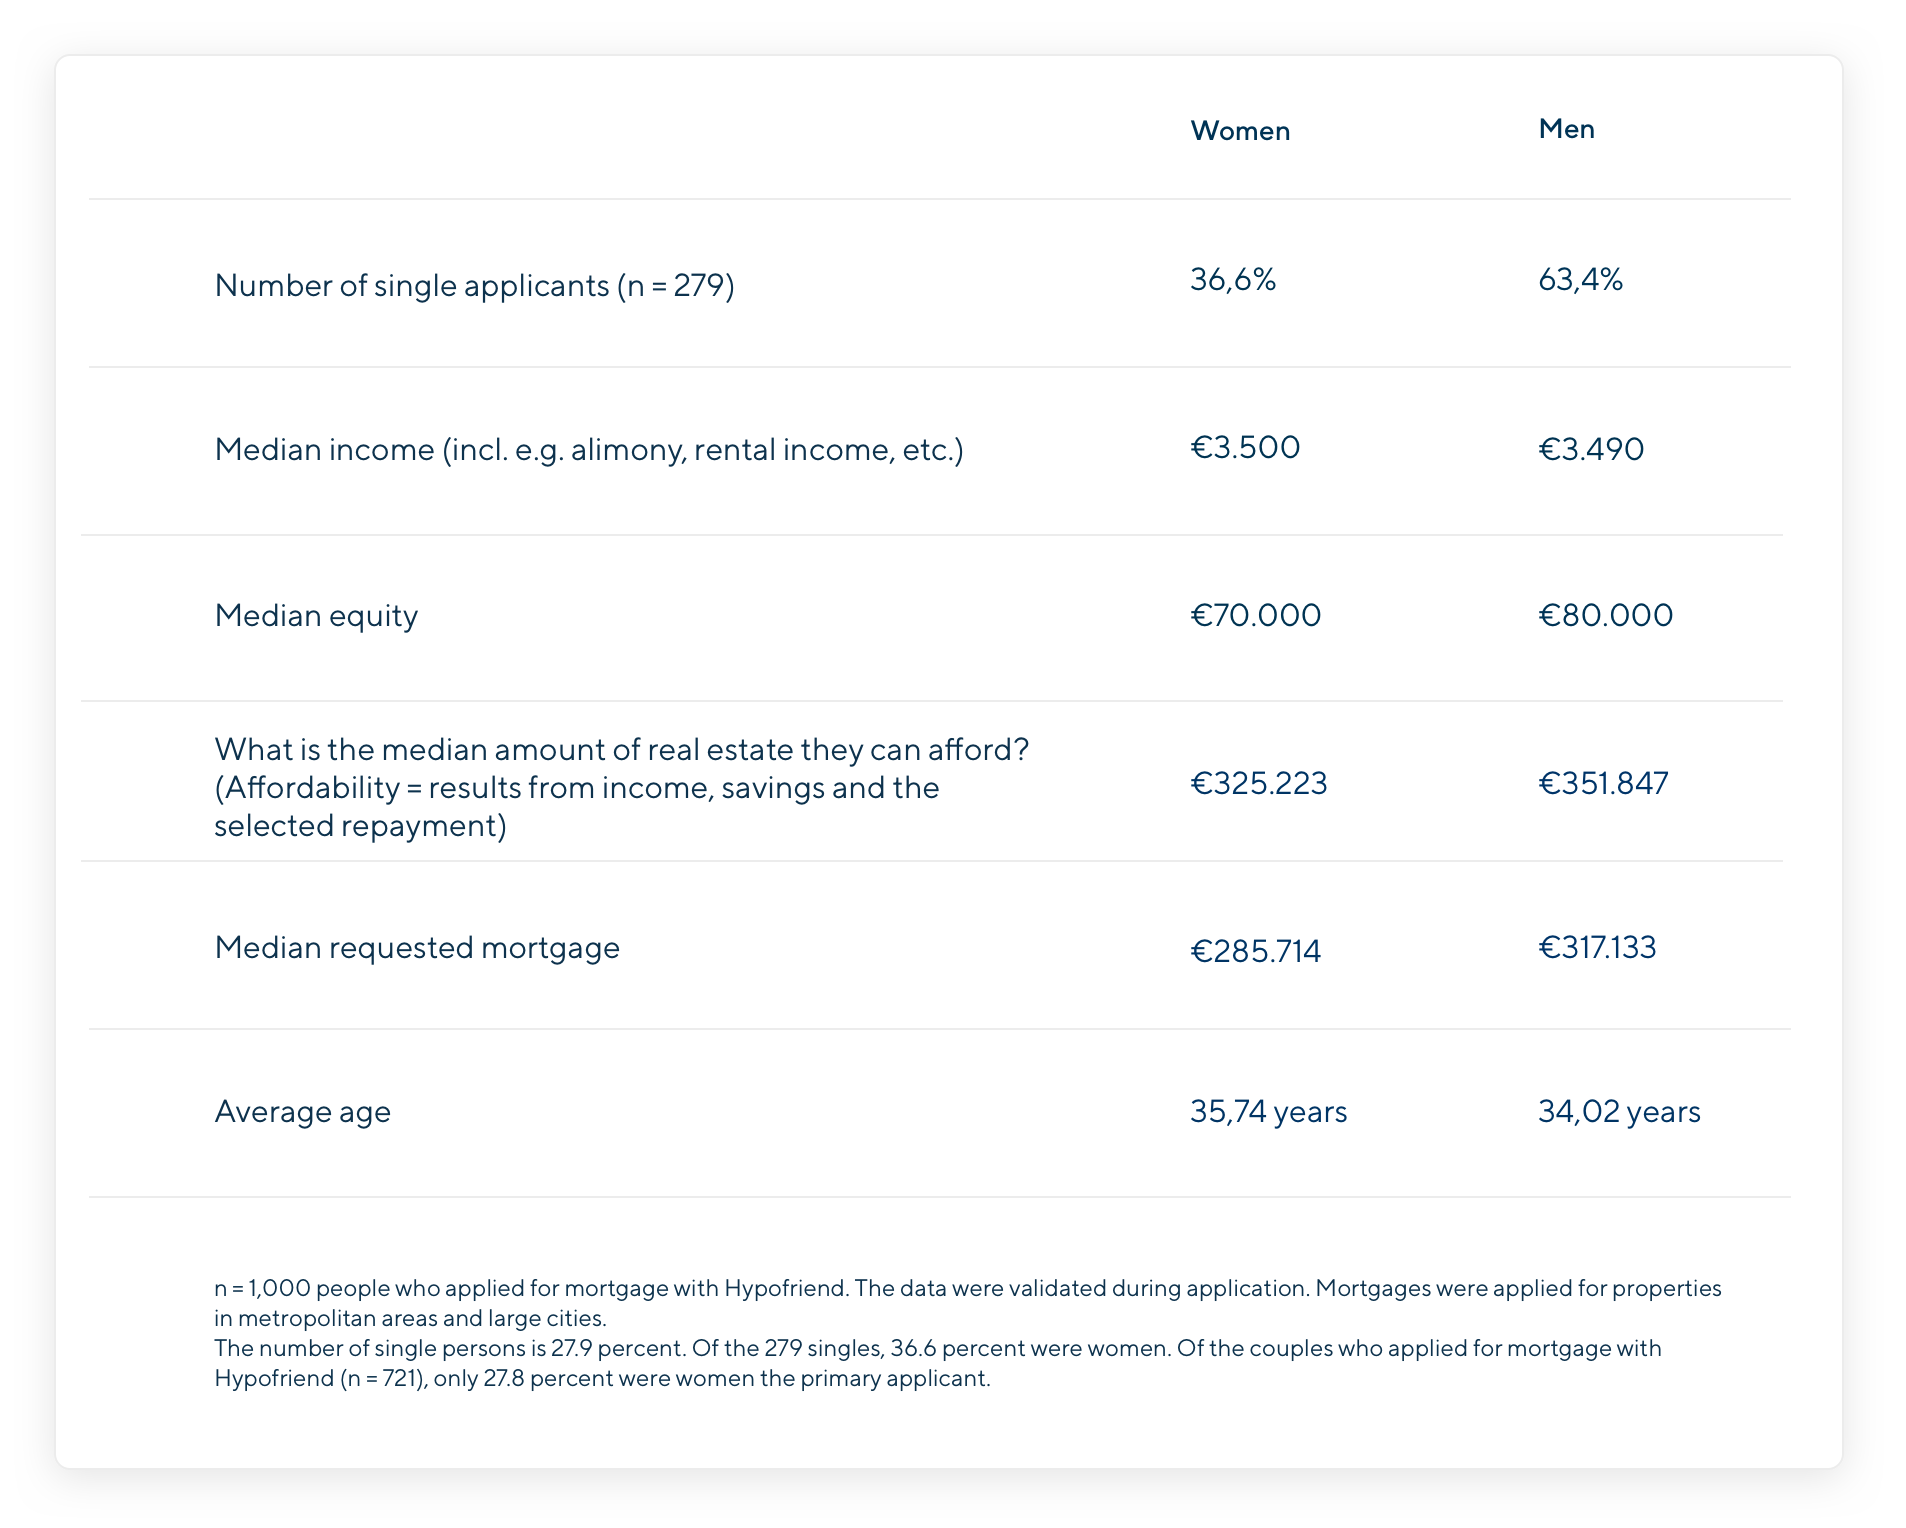 Table, comparison of female property buyer vs male property buyer